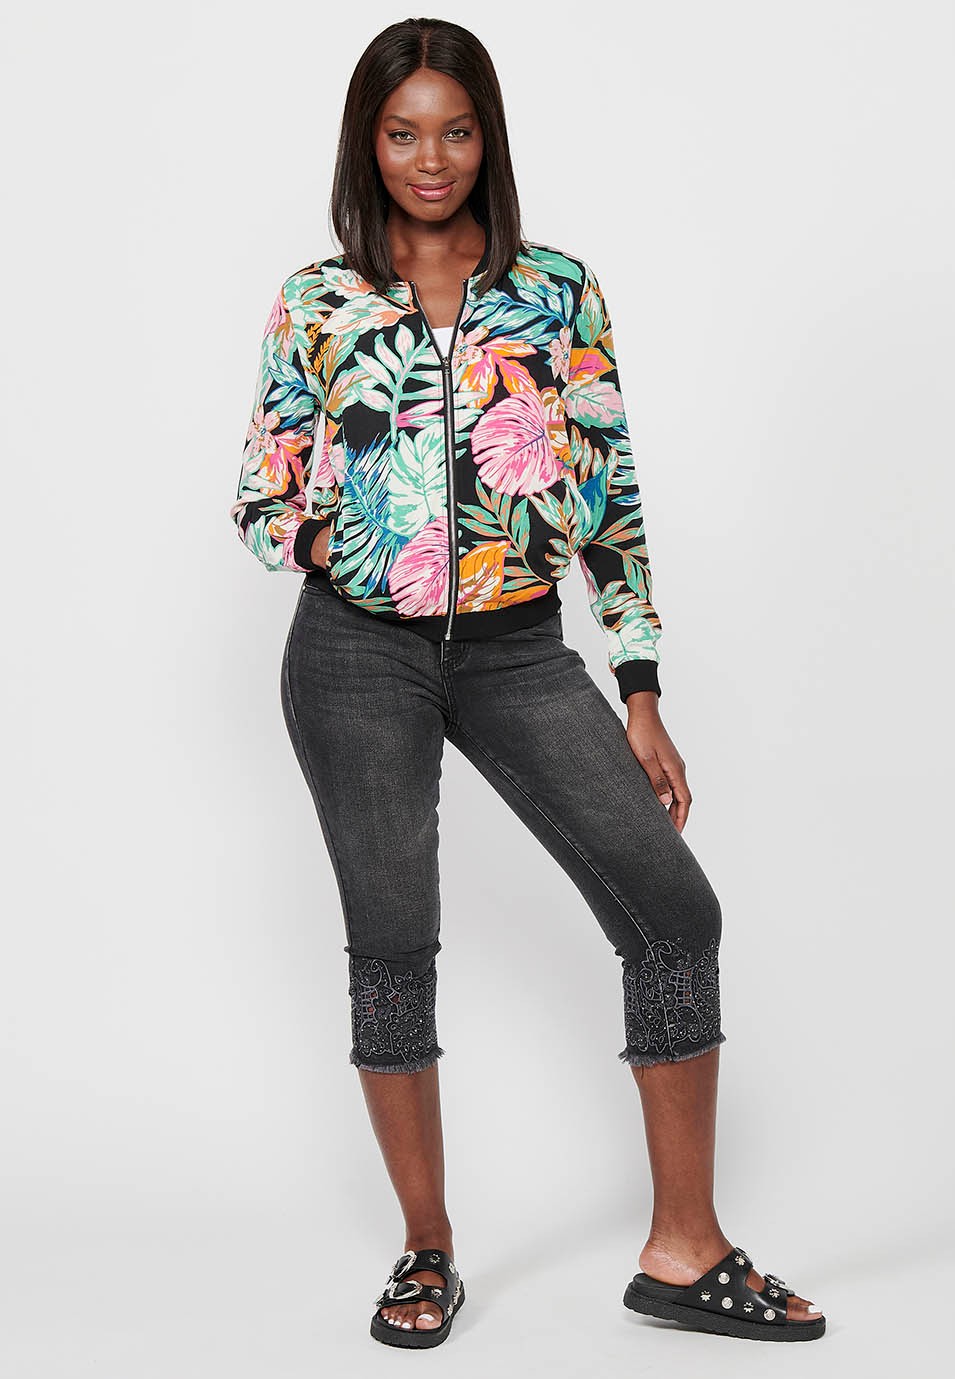 Long-sleeved sweatshirt jacket with ribbed finishes and floral print with front zipper closure. Composition 100% Polyester. Multicolor Color for Women from the Koröshi brand 3